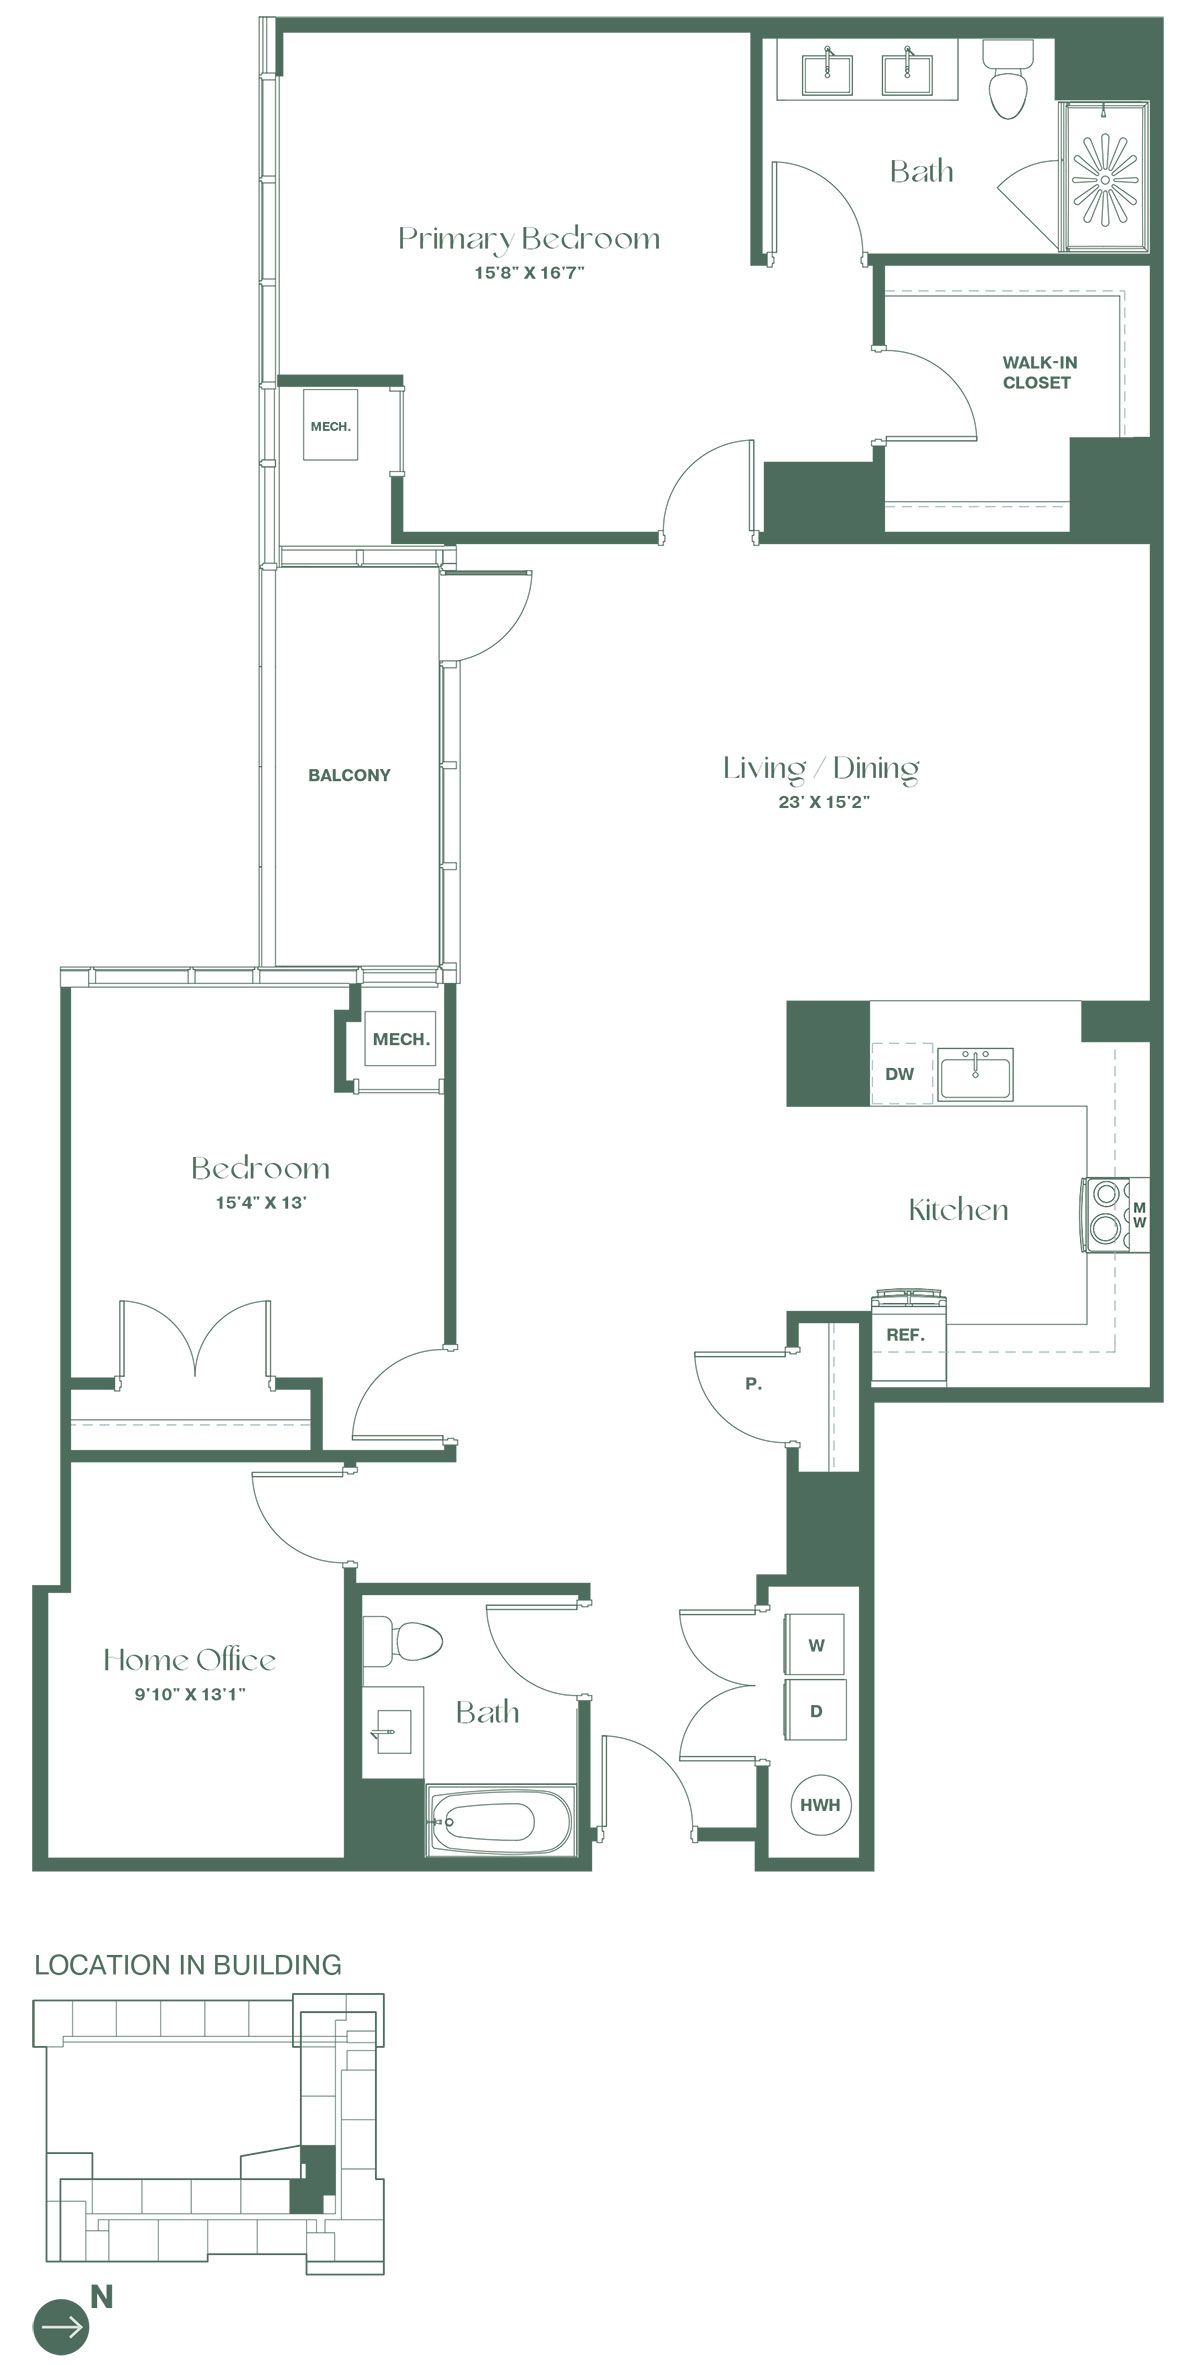 This floorplan for a two-bedroom, two-bathroom apartment at RVR at Xchange opens into a hallway; leading to a full bathroom and a bedroom. Continuing into the apartment is a fully equipped kitchen with a dishwasher and a pantry, a second bedroom and full bathroom, a spacious living and dining room ad a balcony.